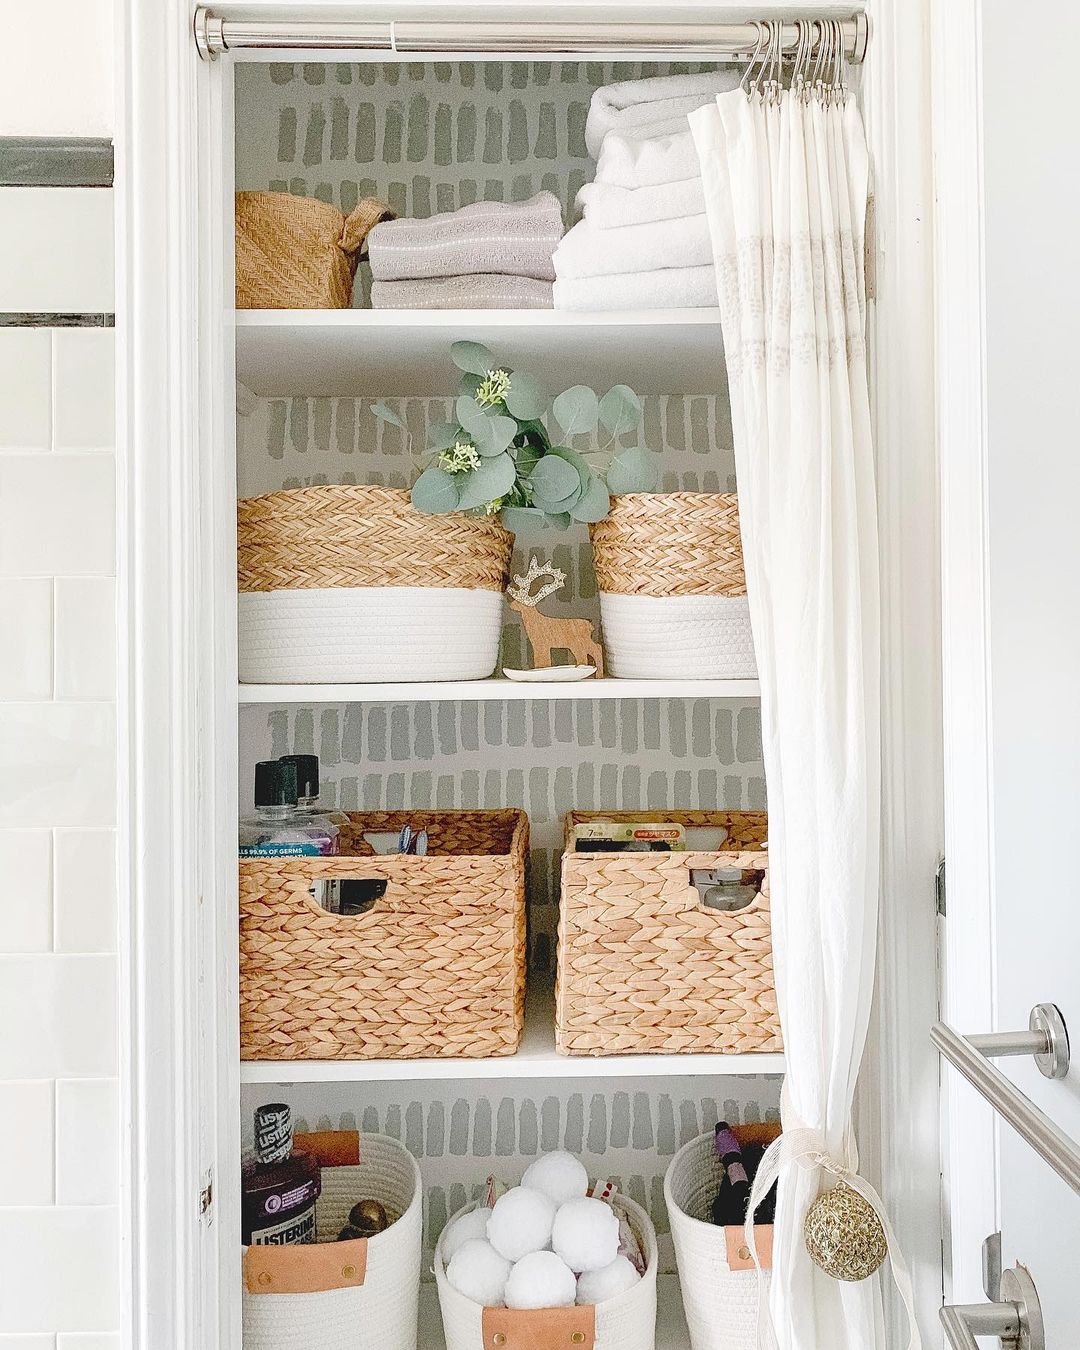 38 Bathroom Closet Ideas for a Clean and Clutter Free Space